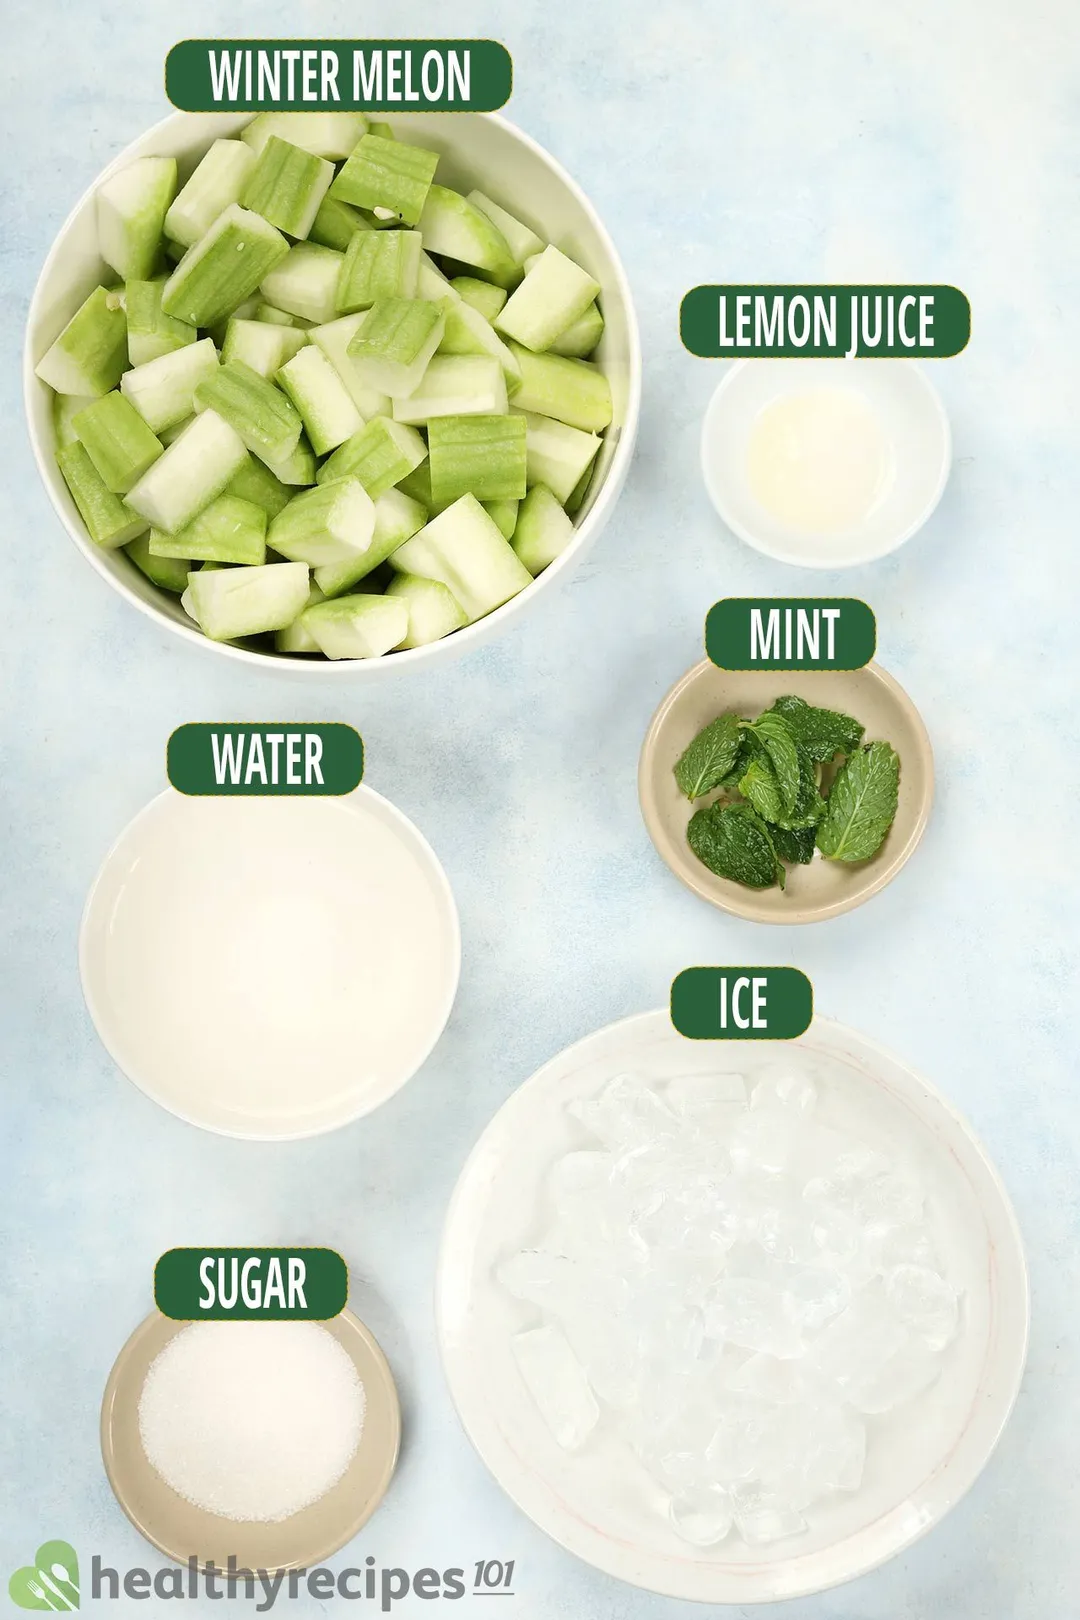 Ingredients for winter melon juice, including winter melon cubes, water, mint leaves, ice, lemon juice, and sugar.